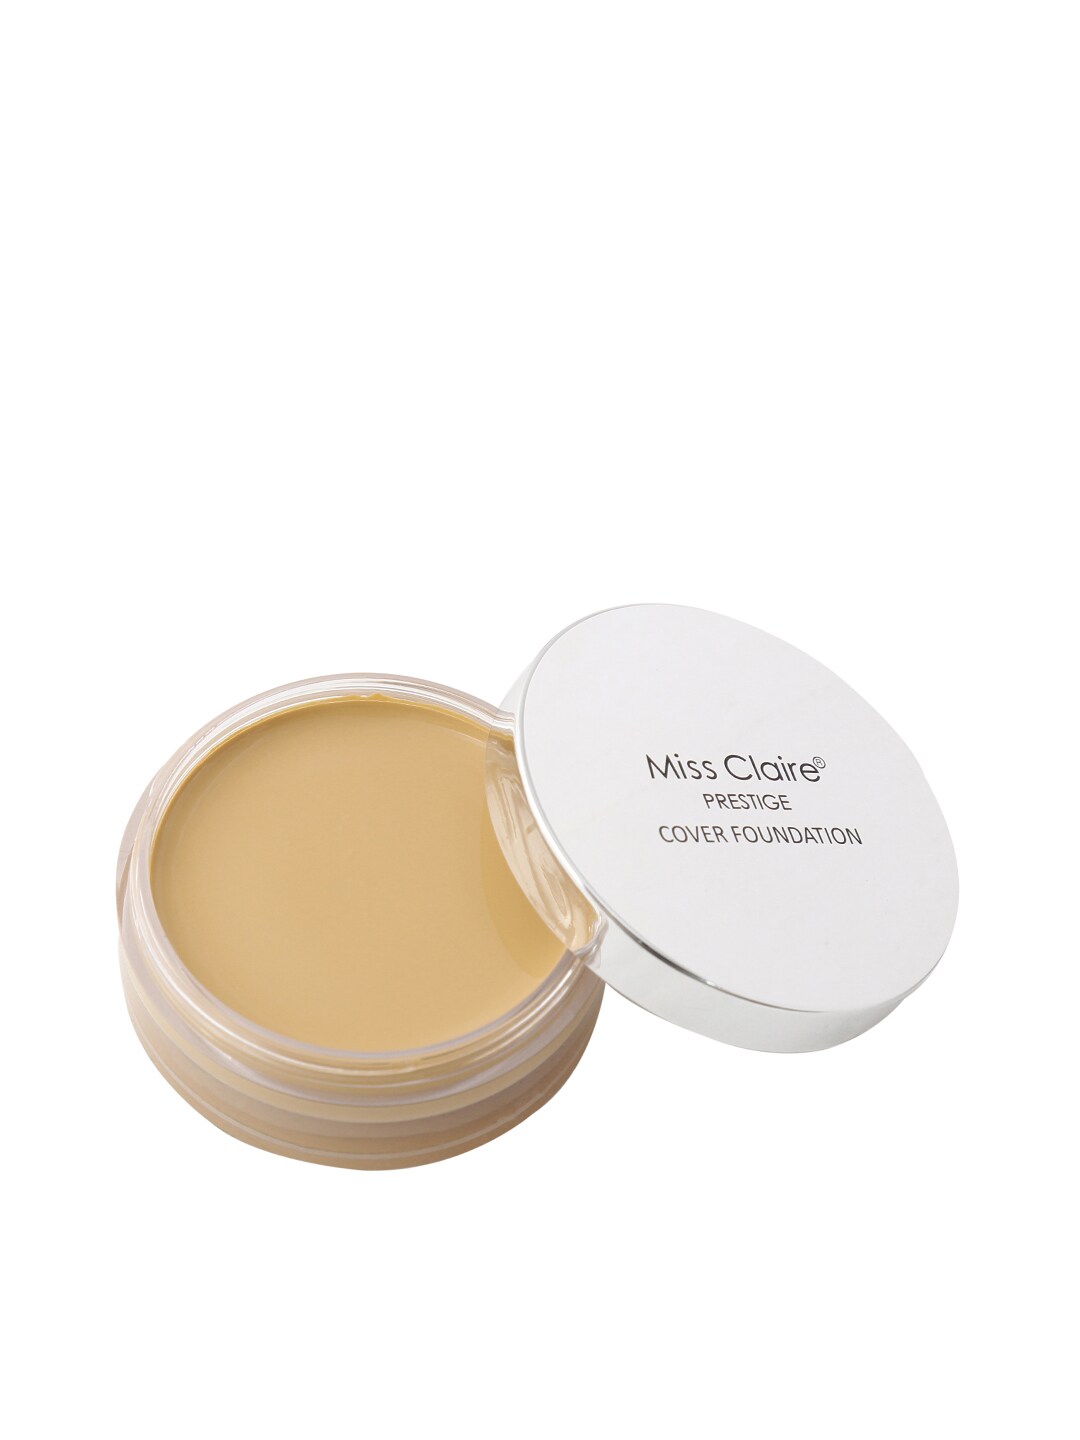 Miss Claire 03 Beige Prestige Cover Foundation 20g Price in India